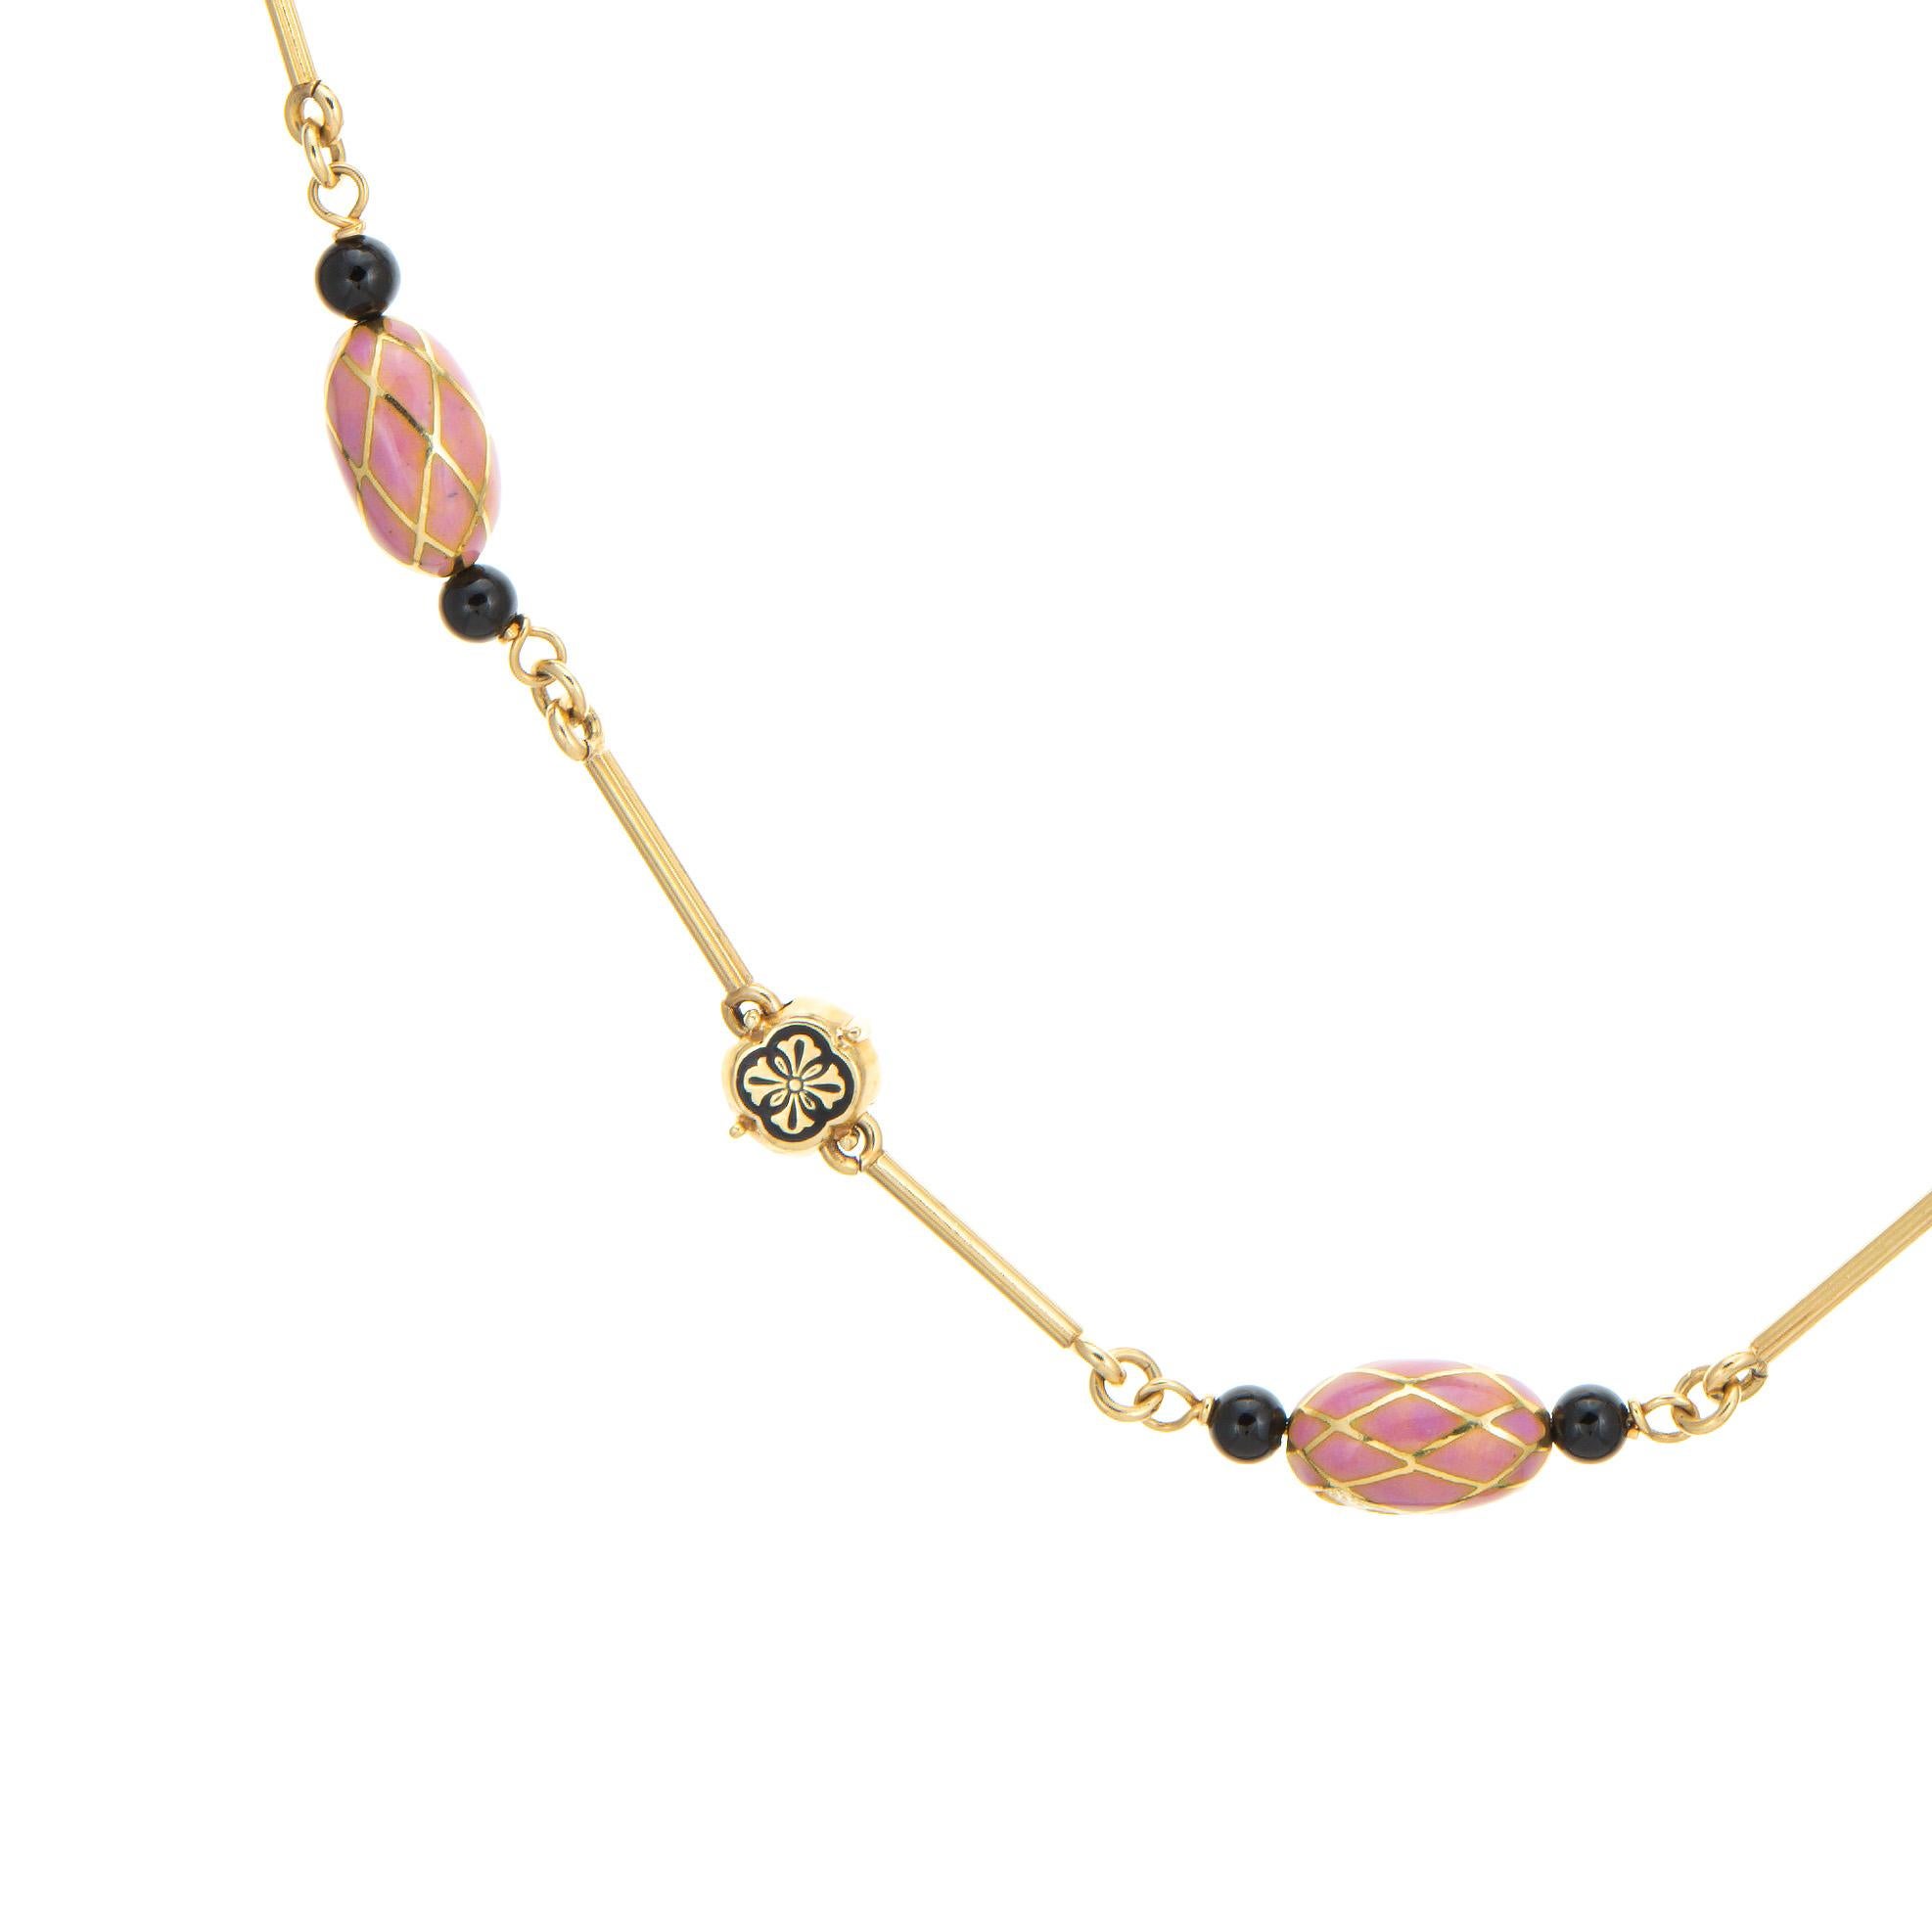 Stylish and finely detailed vintage French import necklace (circa 1960s to 1970s) crafted in 18 karat yellow gold. 

The beautifully crafted necklace features pink enameled orbs framed with black onyx beads to both ends, with an alternating pattern